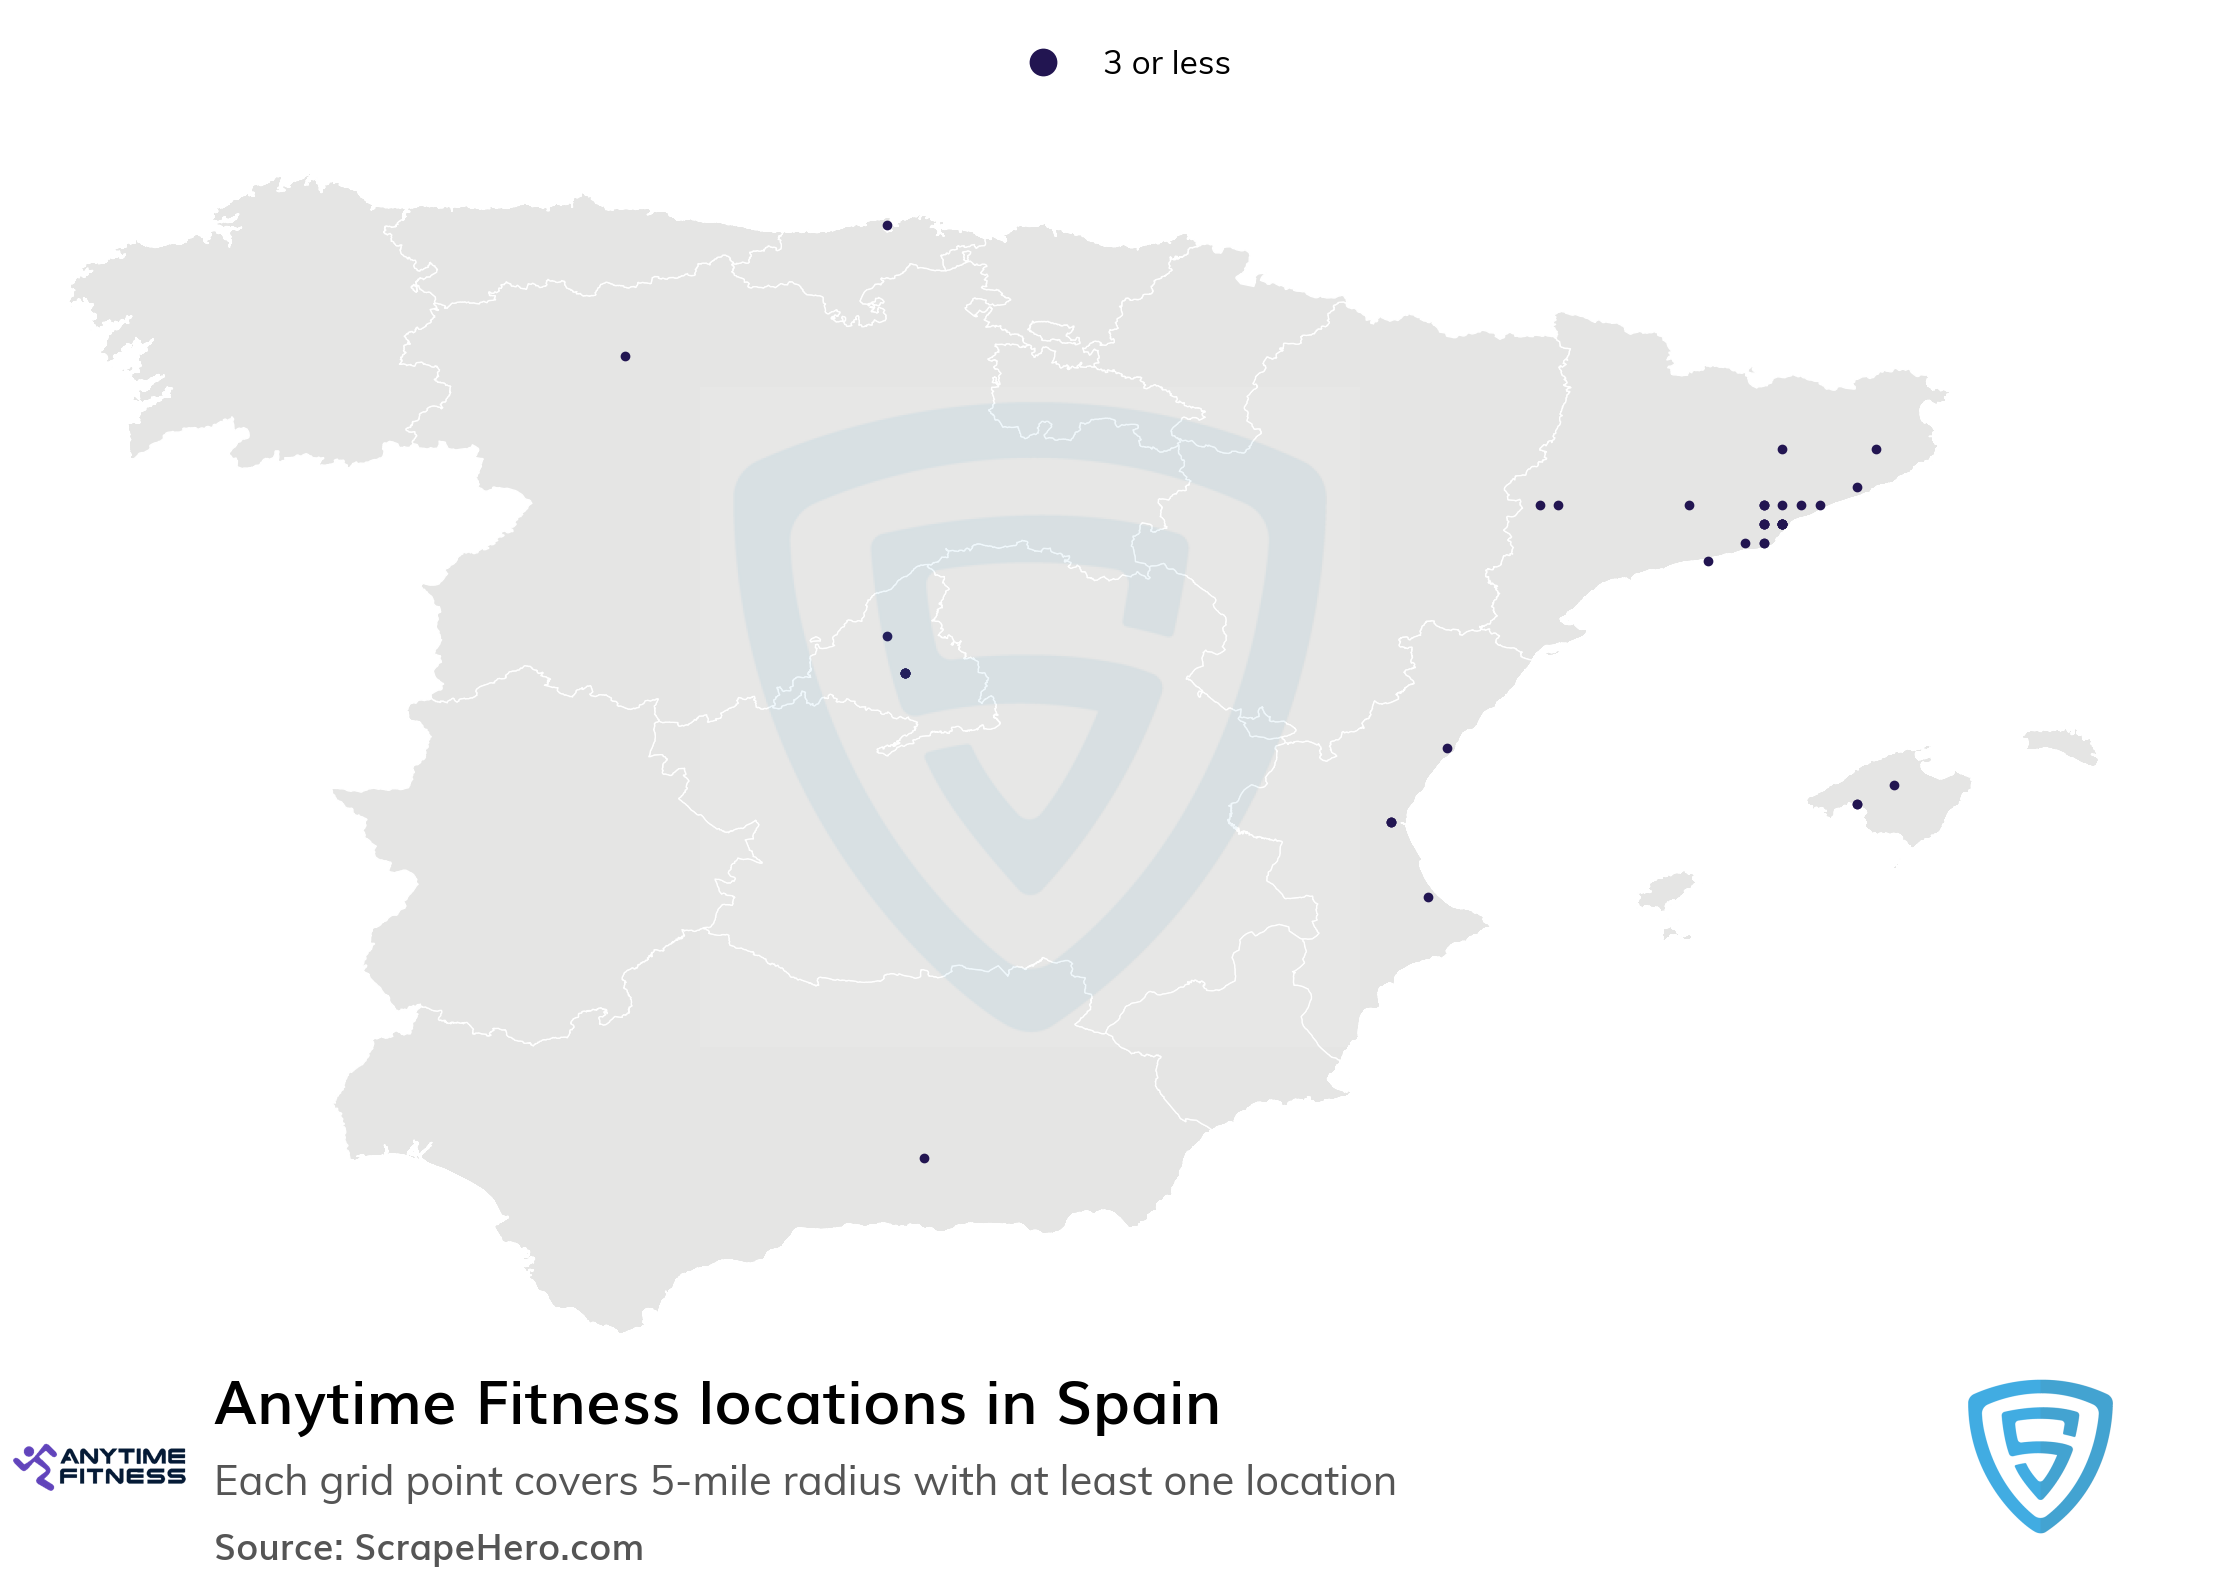 https://www.scrapehero.com/store/wp-content/uploads/maps/Anytime_Fitness_Spain.png